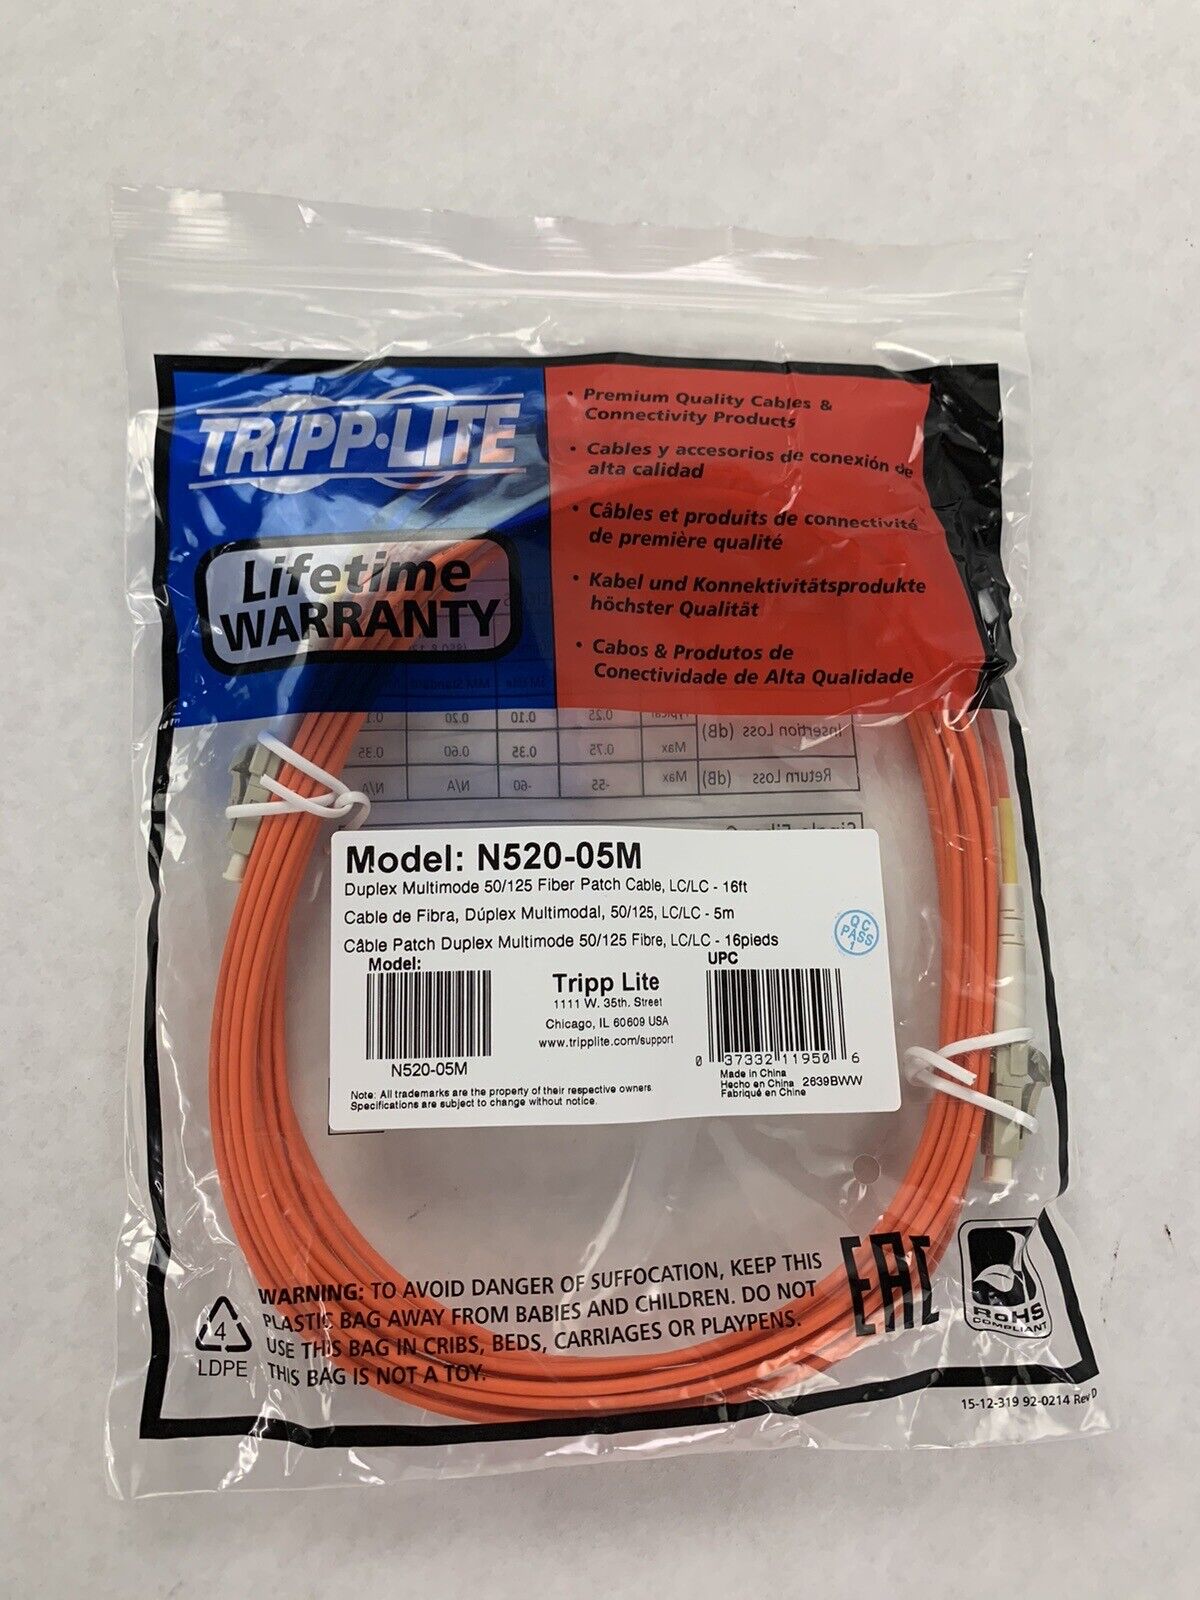 Tripp Lite N520-05M 5m Fiber Optic LC Male to Male Patch Cable